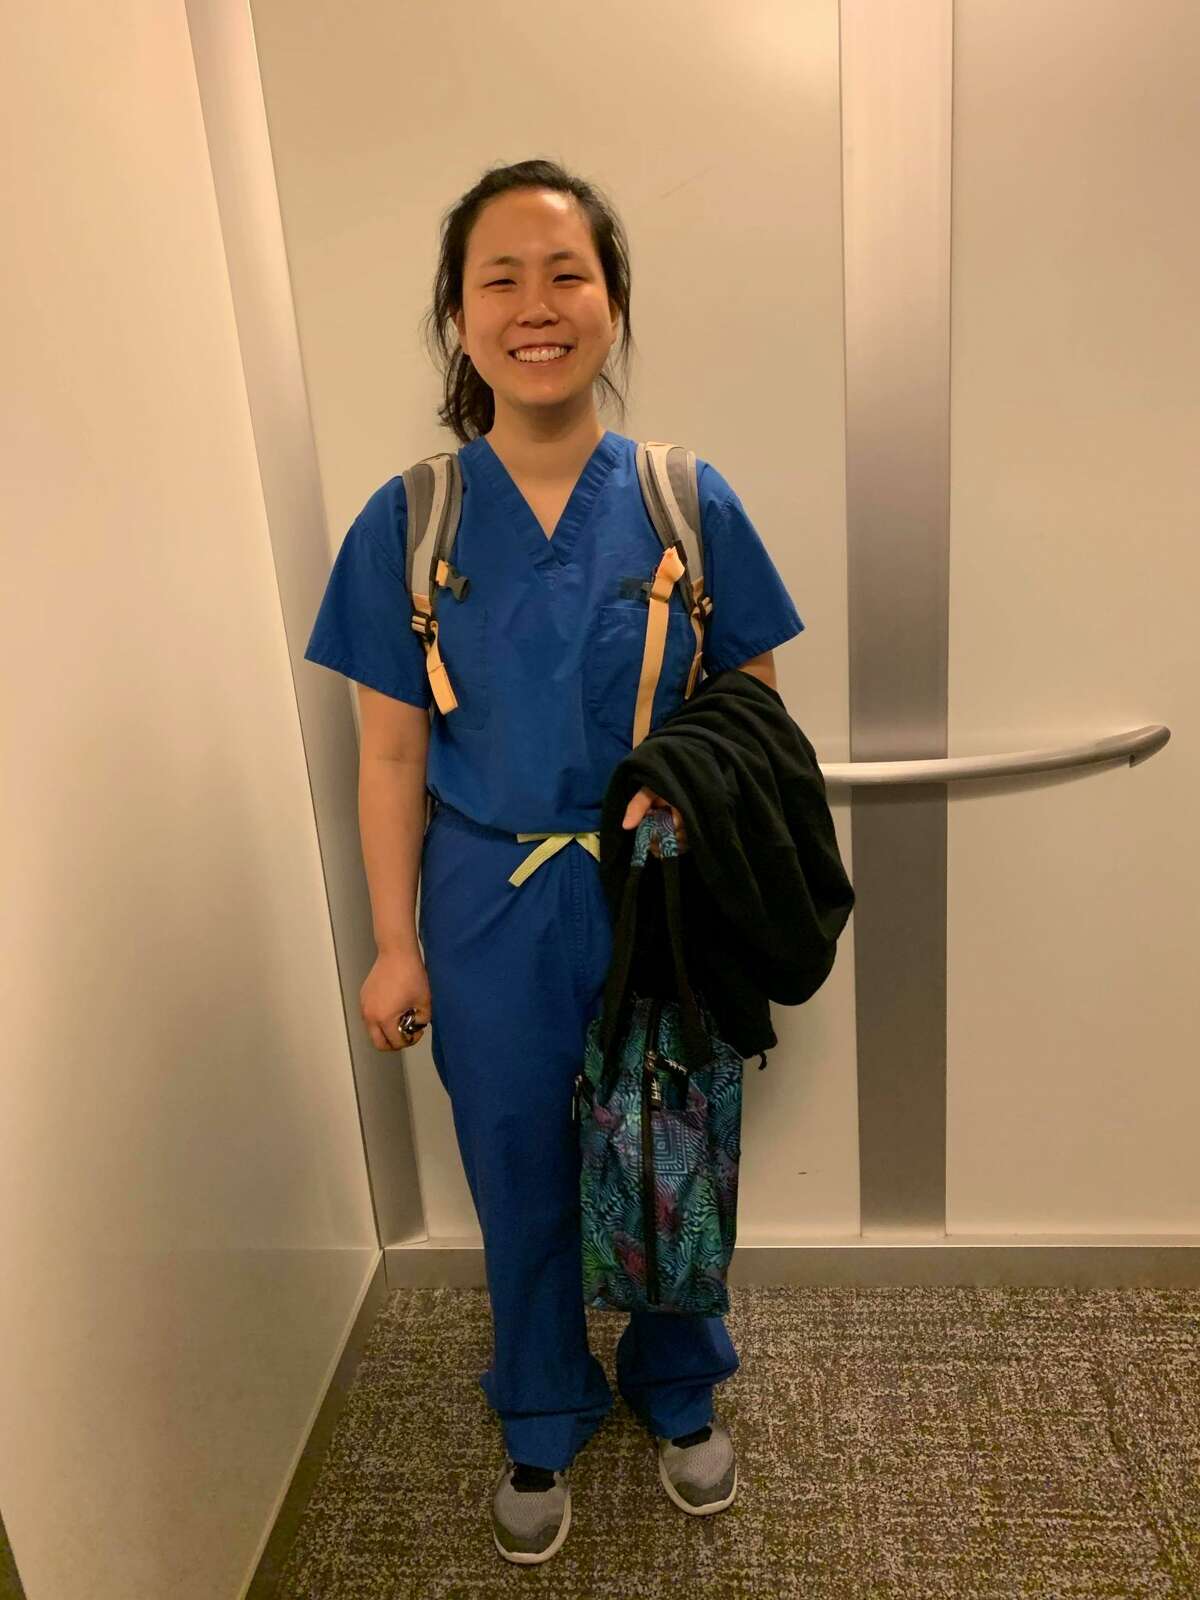 Dr. Lily Kim class of 2010 is a medical resident with UTMB in Galveston.